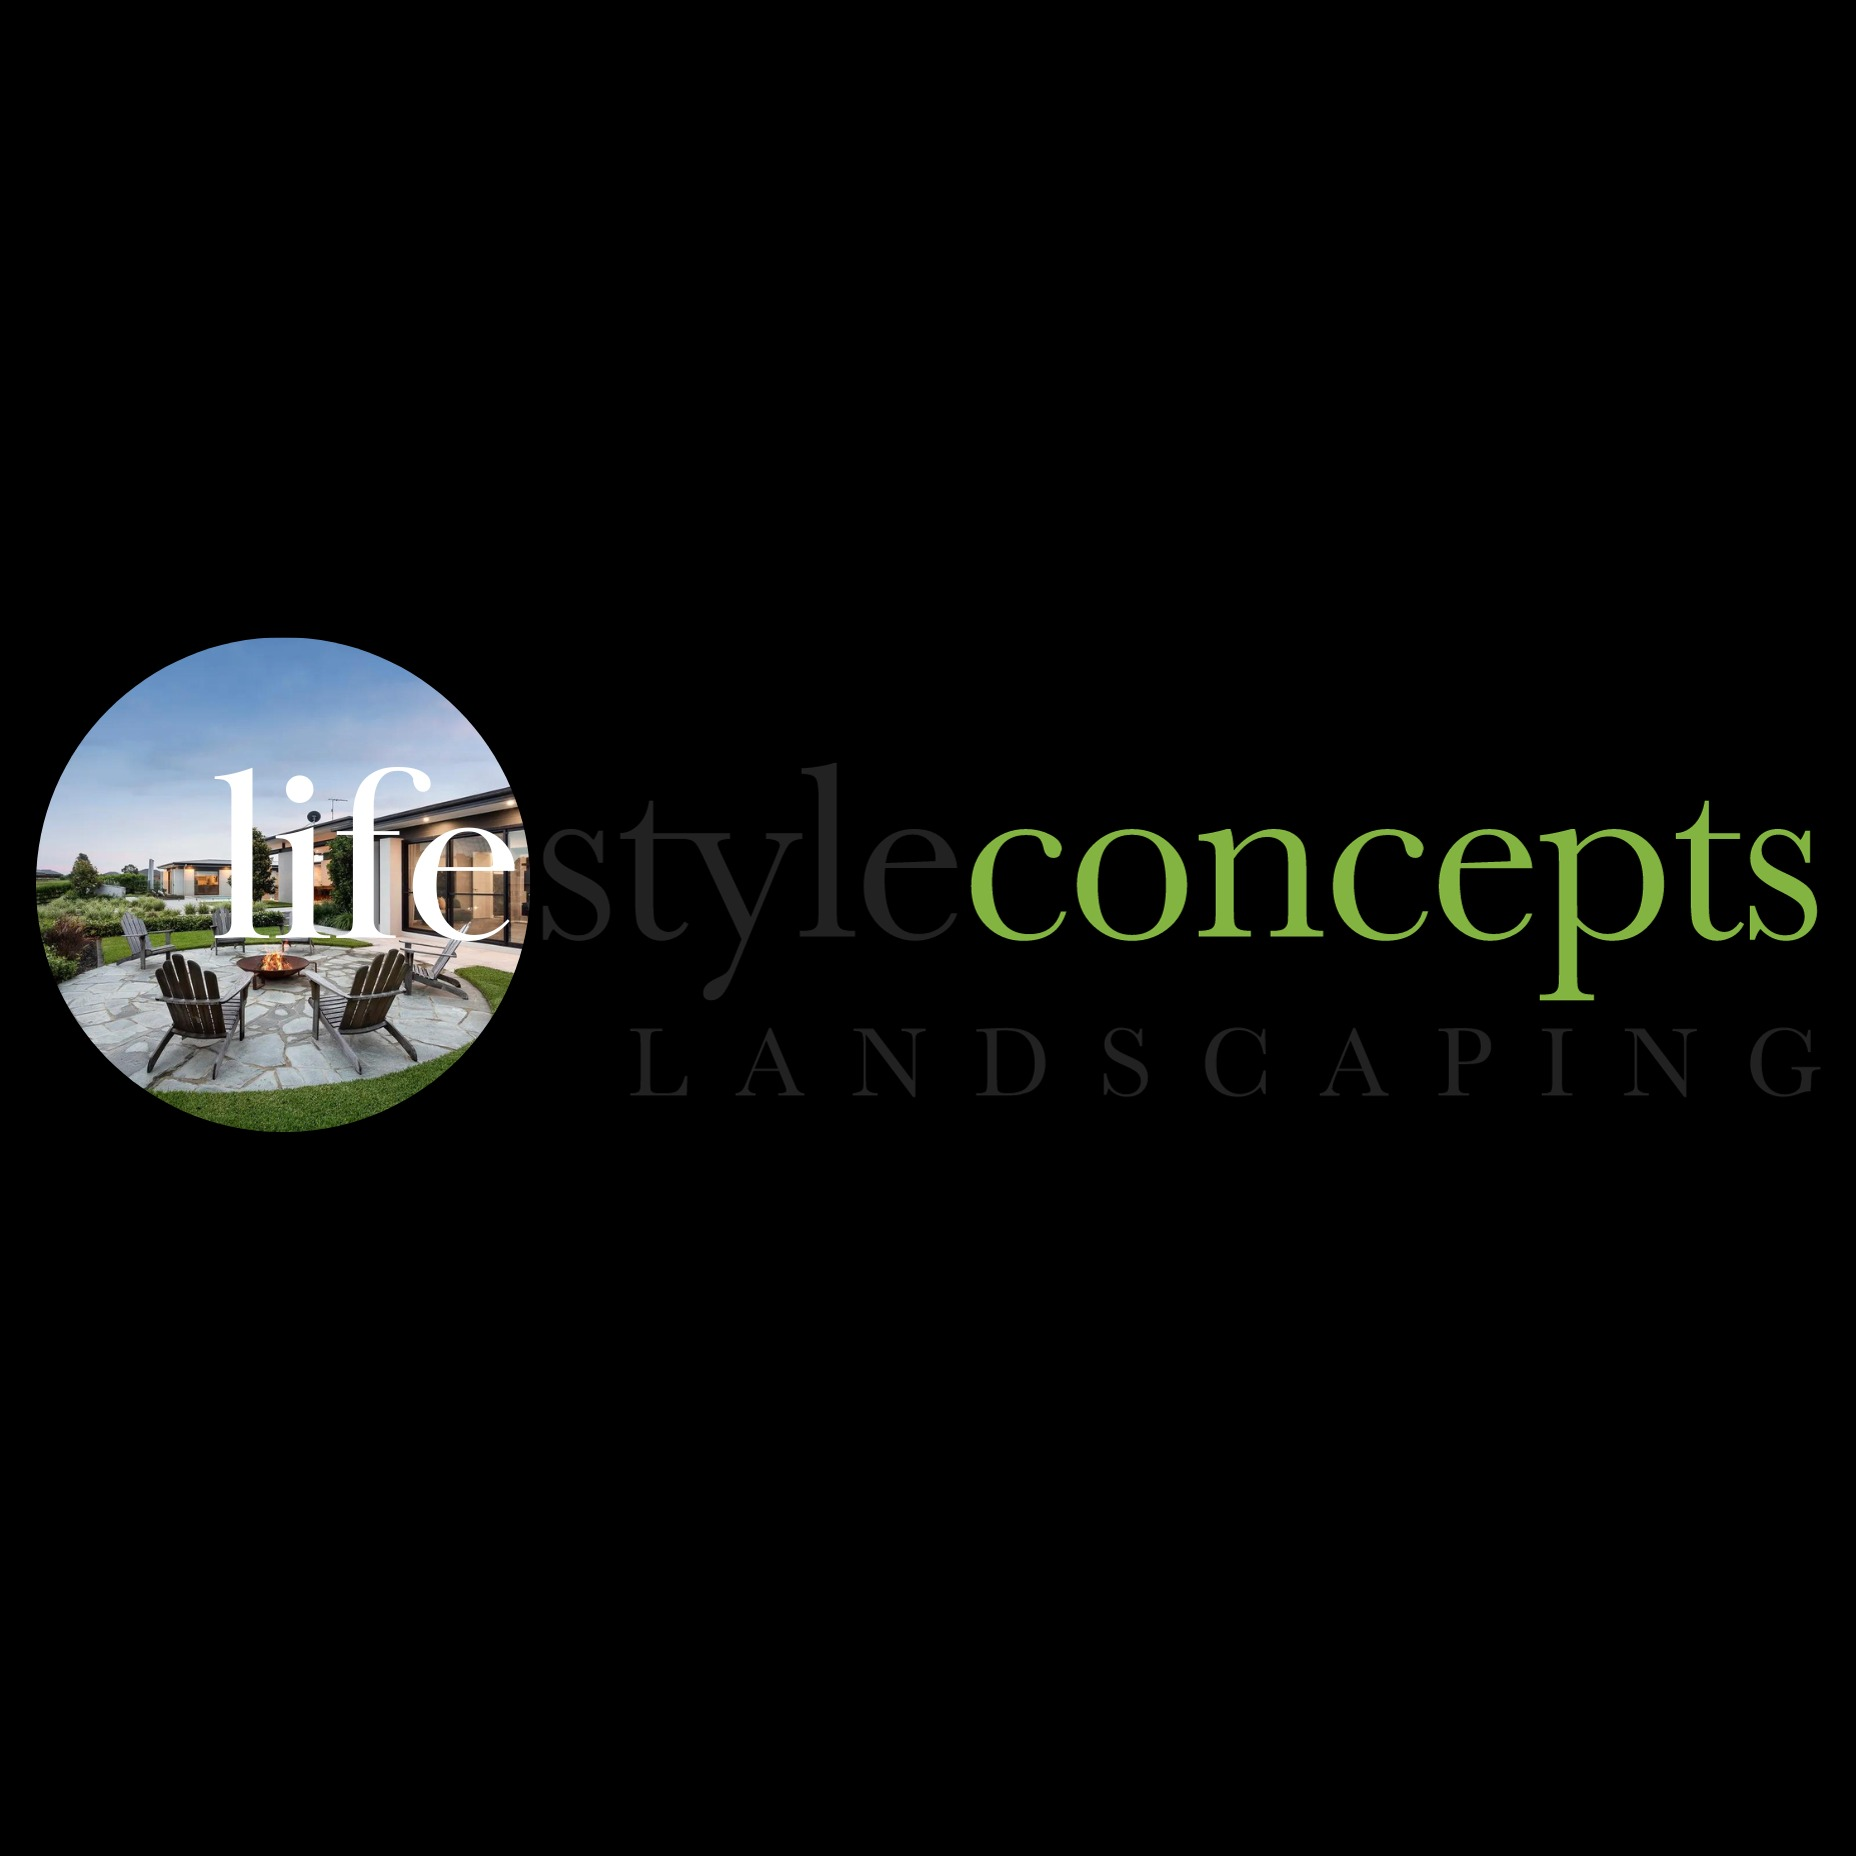 LifeStyle Concepts Landscaping Logo